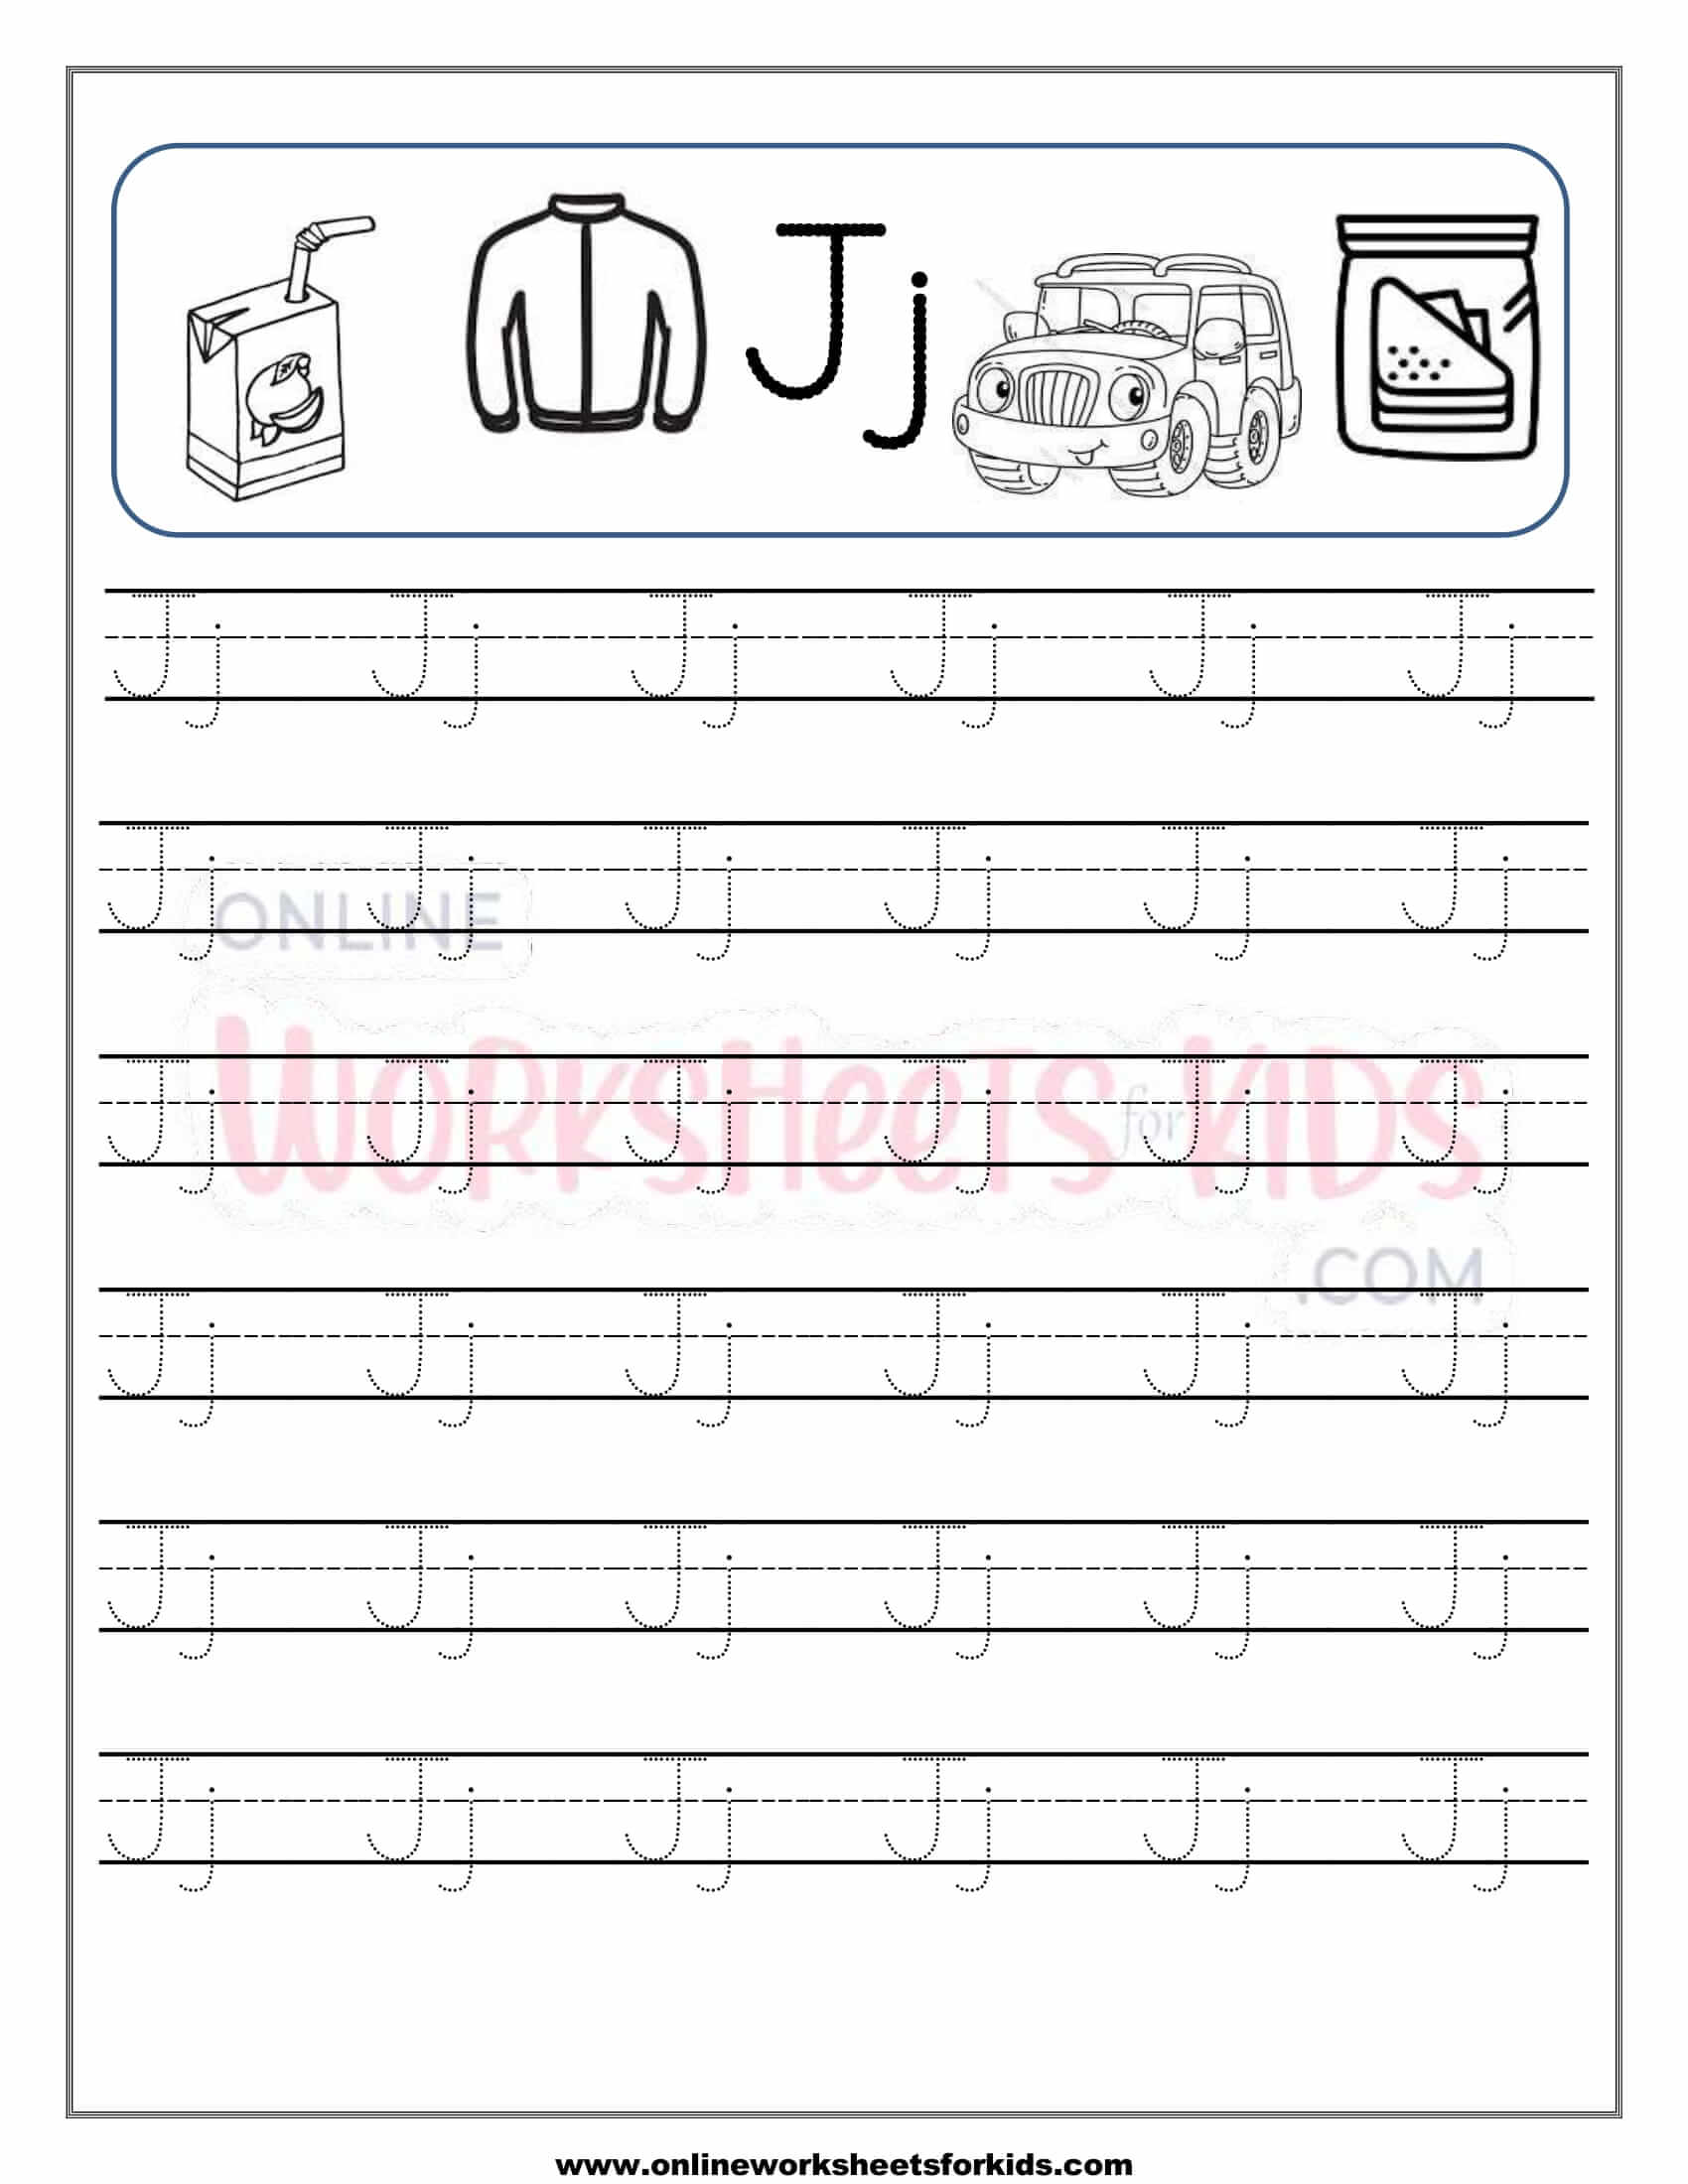 capital-and-small-letter-tracing-worksheet-10